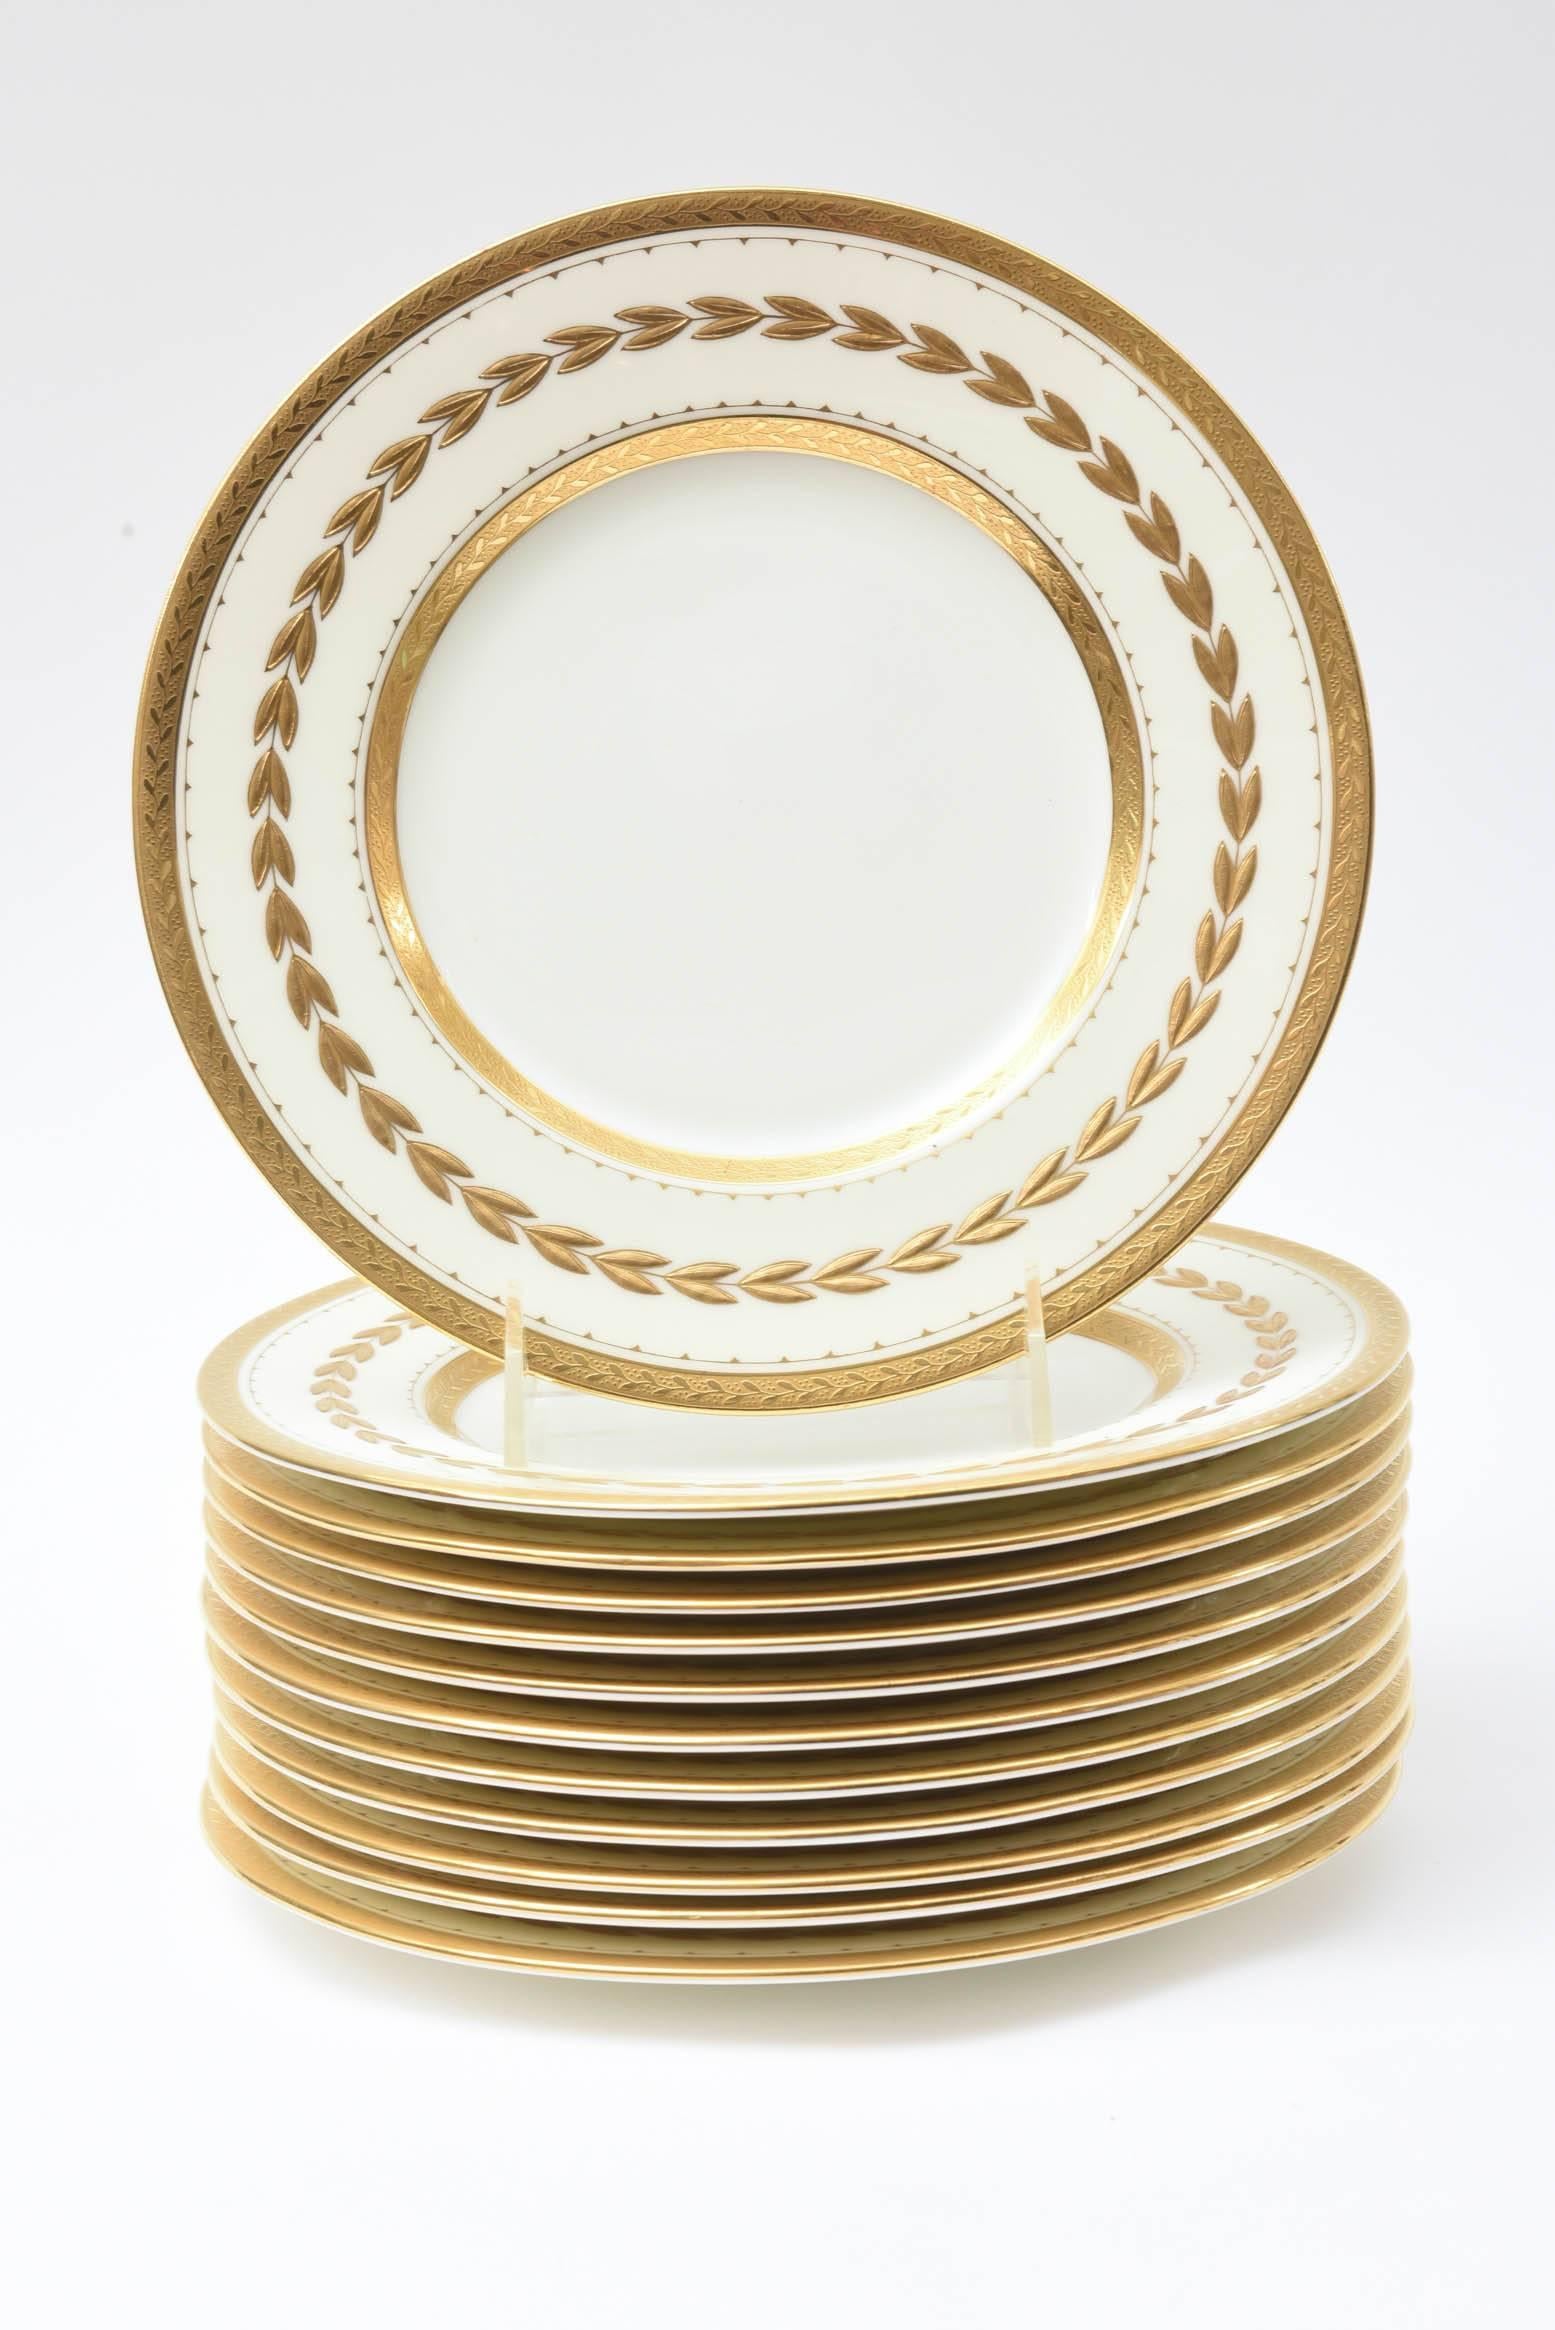 A classic and crisp set of 12 plate’s custom ordered through the fine Gilded Age Retailer: Tiffany & Co, New York. Manufactured by the storied English porcelain firm of Minton. A thick heavy raised paste design on the collar of the plates and